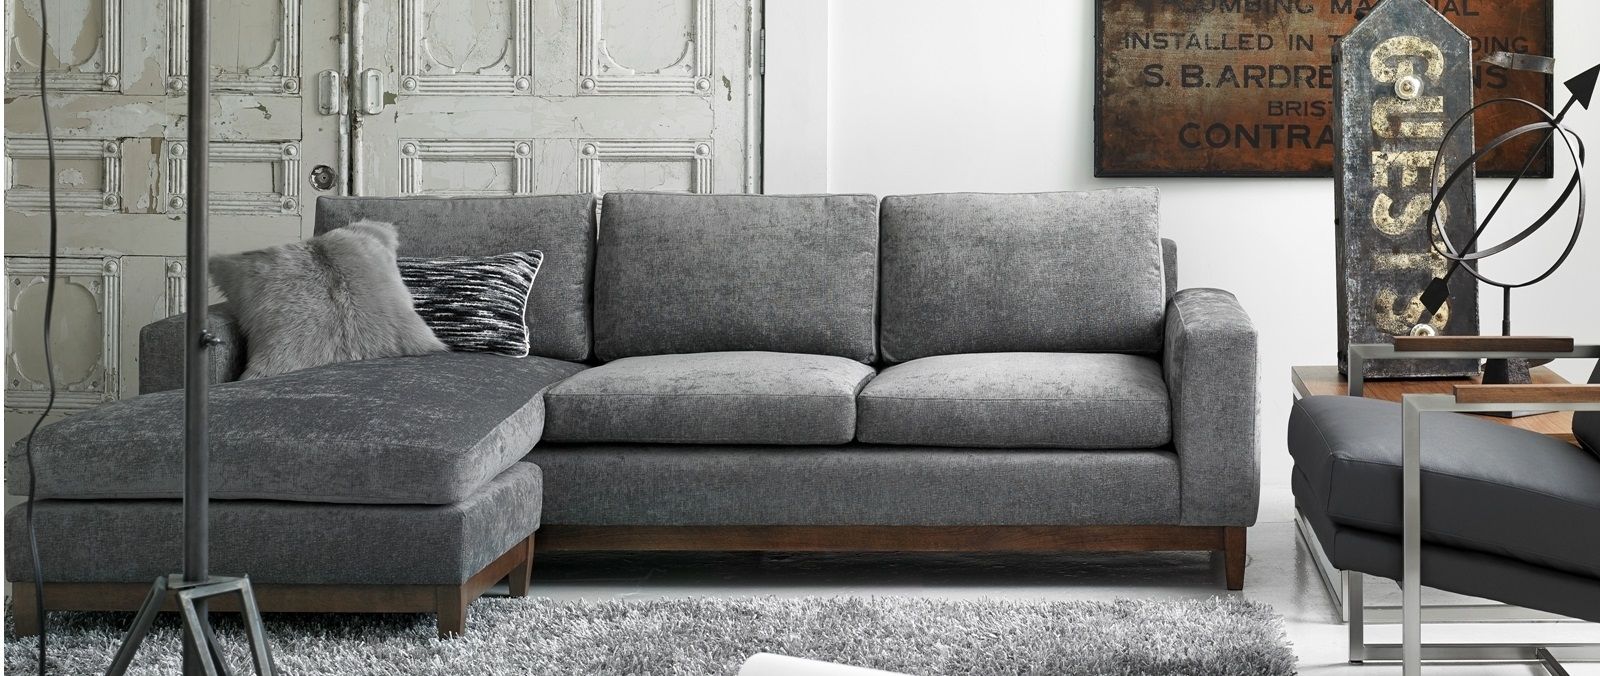 Modern Furniture Store Montreal And Ottawa | Mikazahome Inside Gatineau Sectional Sofas (View 7 of 10)